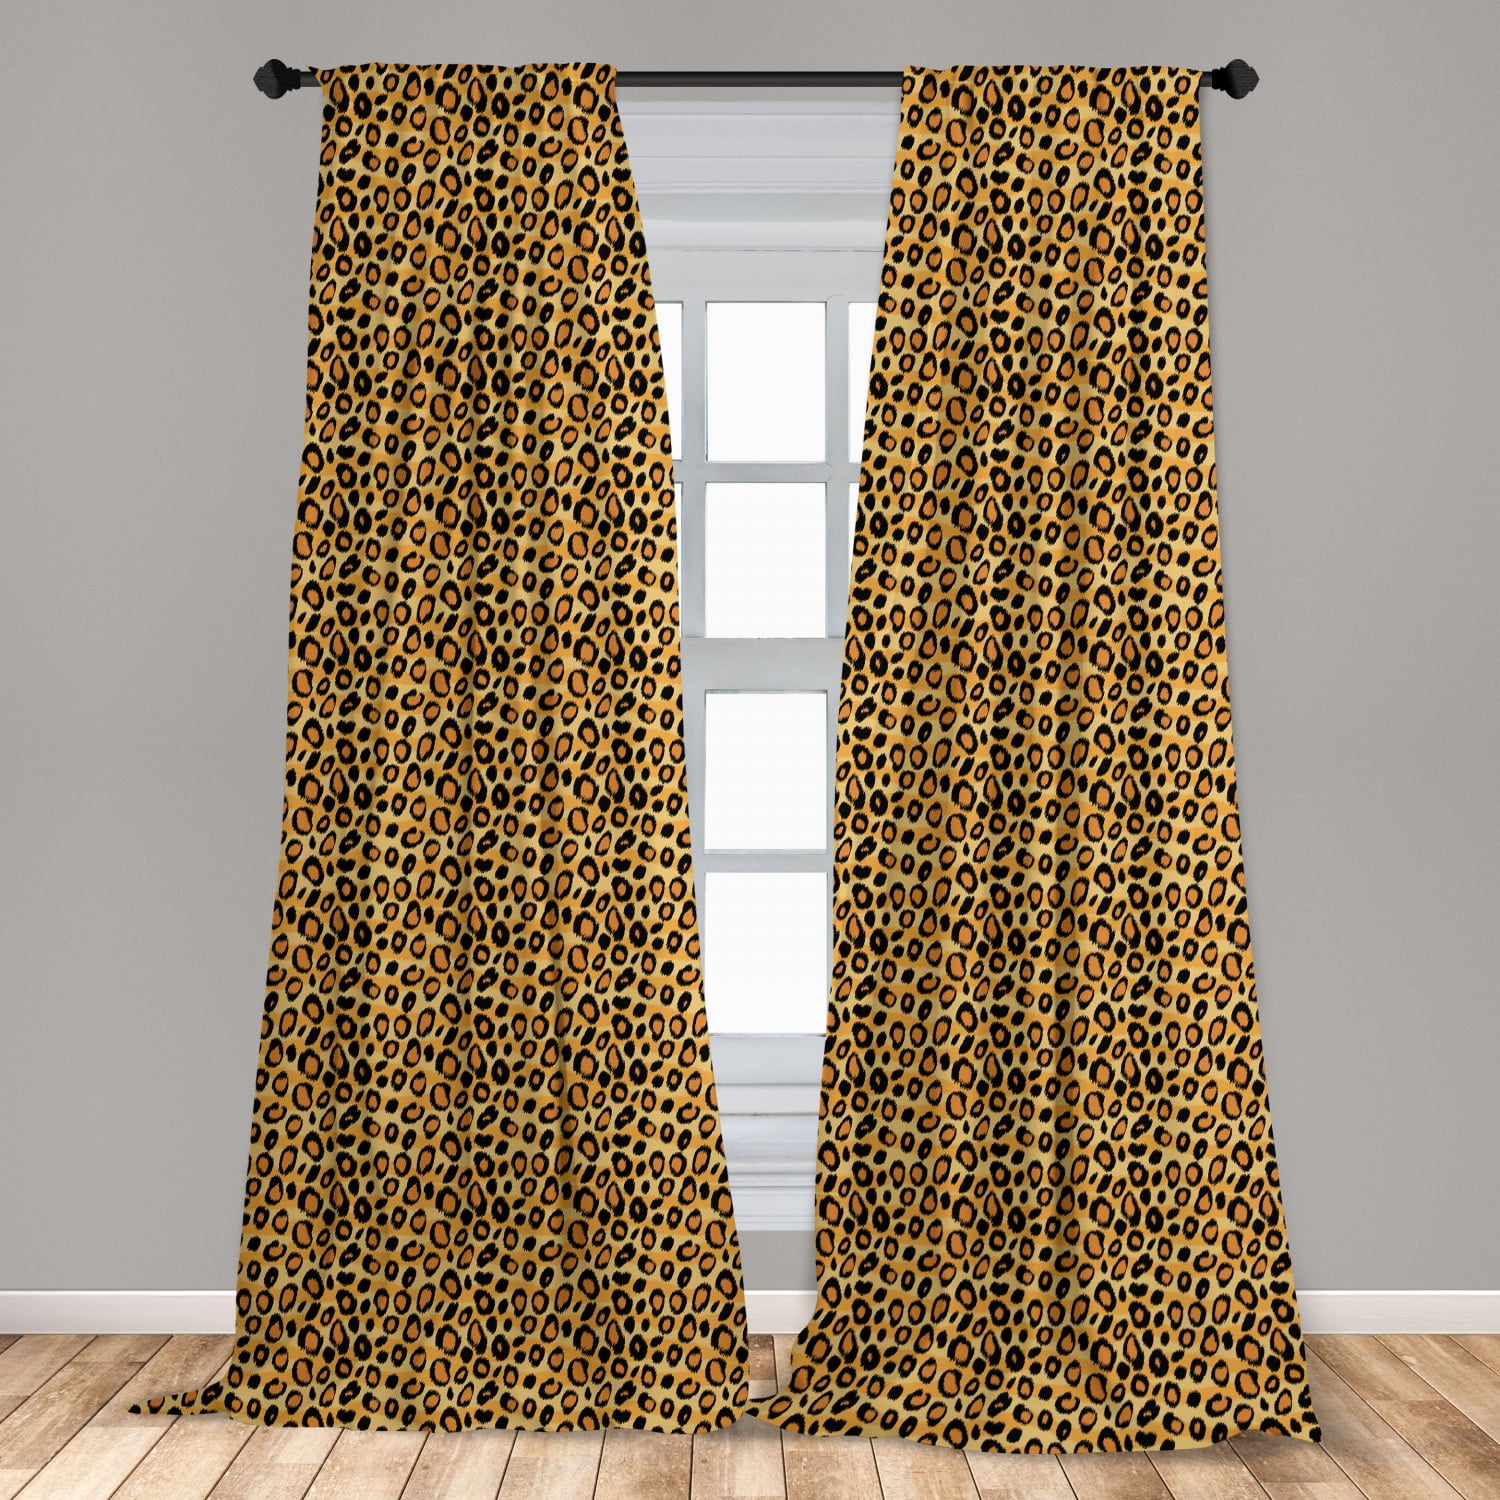 Assorted Sizes Exotic Tiger & Zebra Printed Sheer Voile Safari Window Curtains 